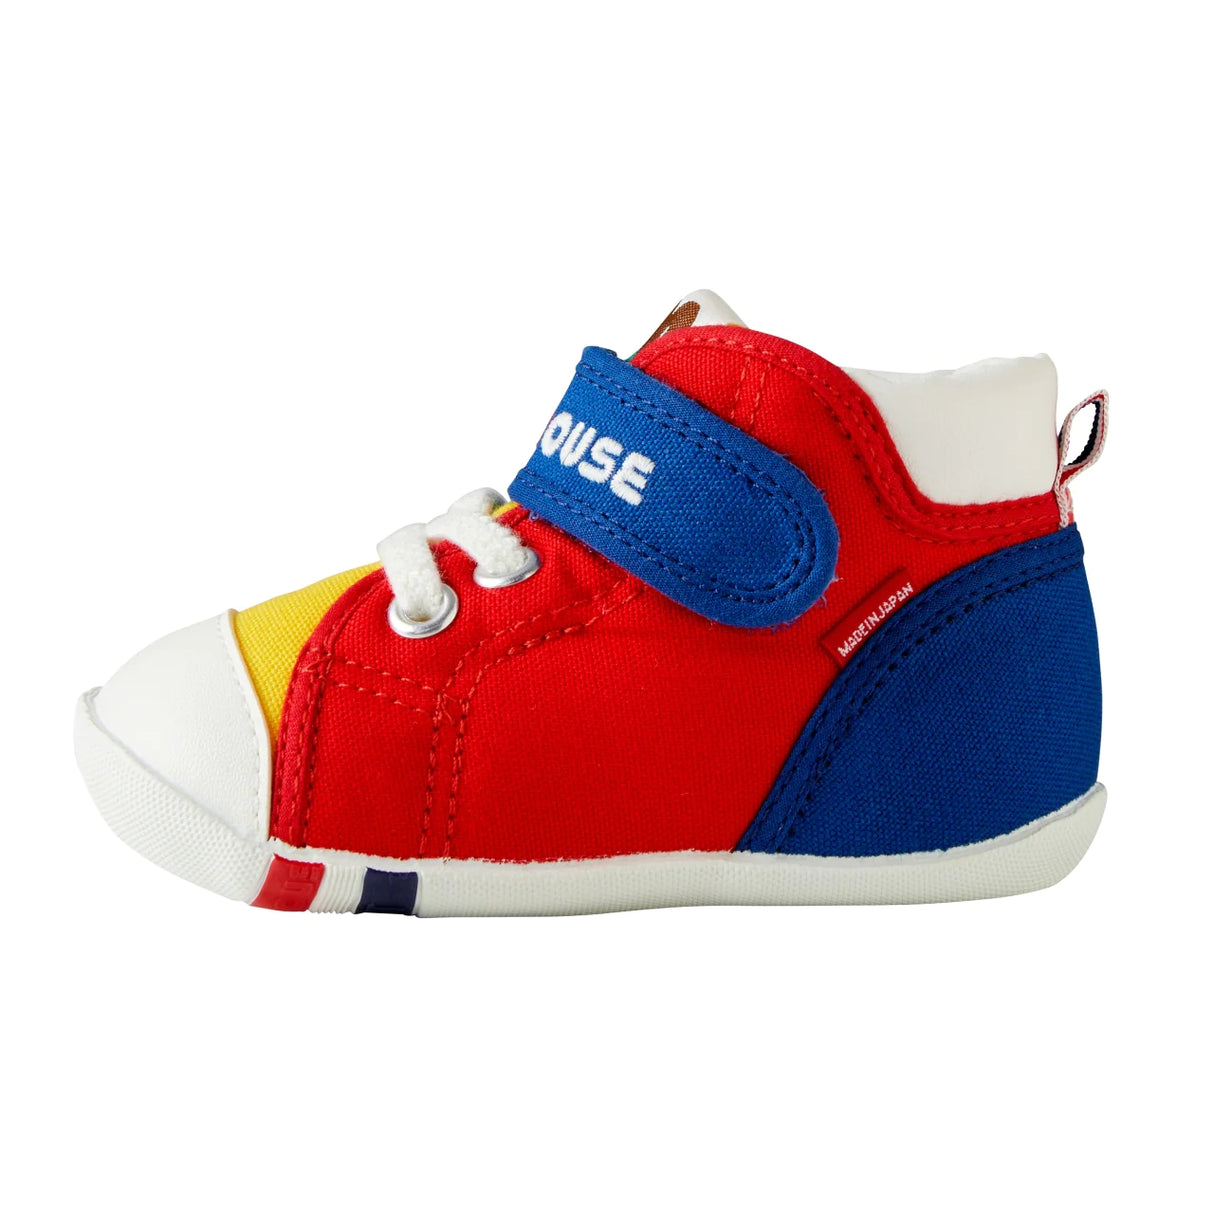 Japanese mikihouse color block toddler shoes 1 section 10